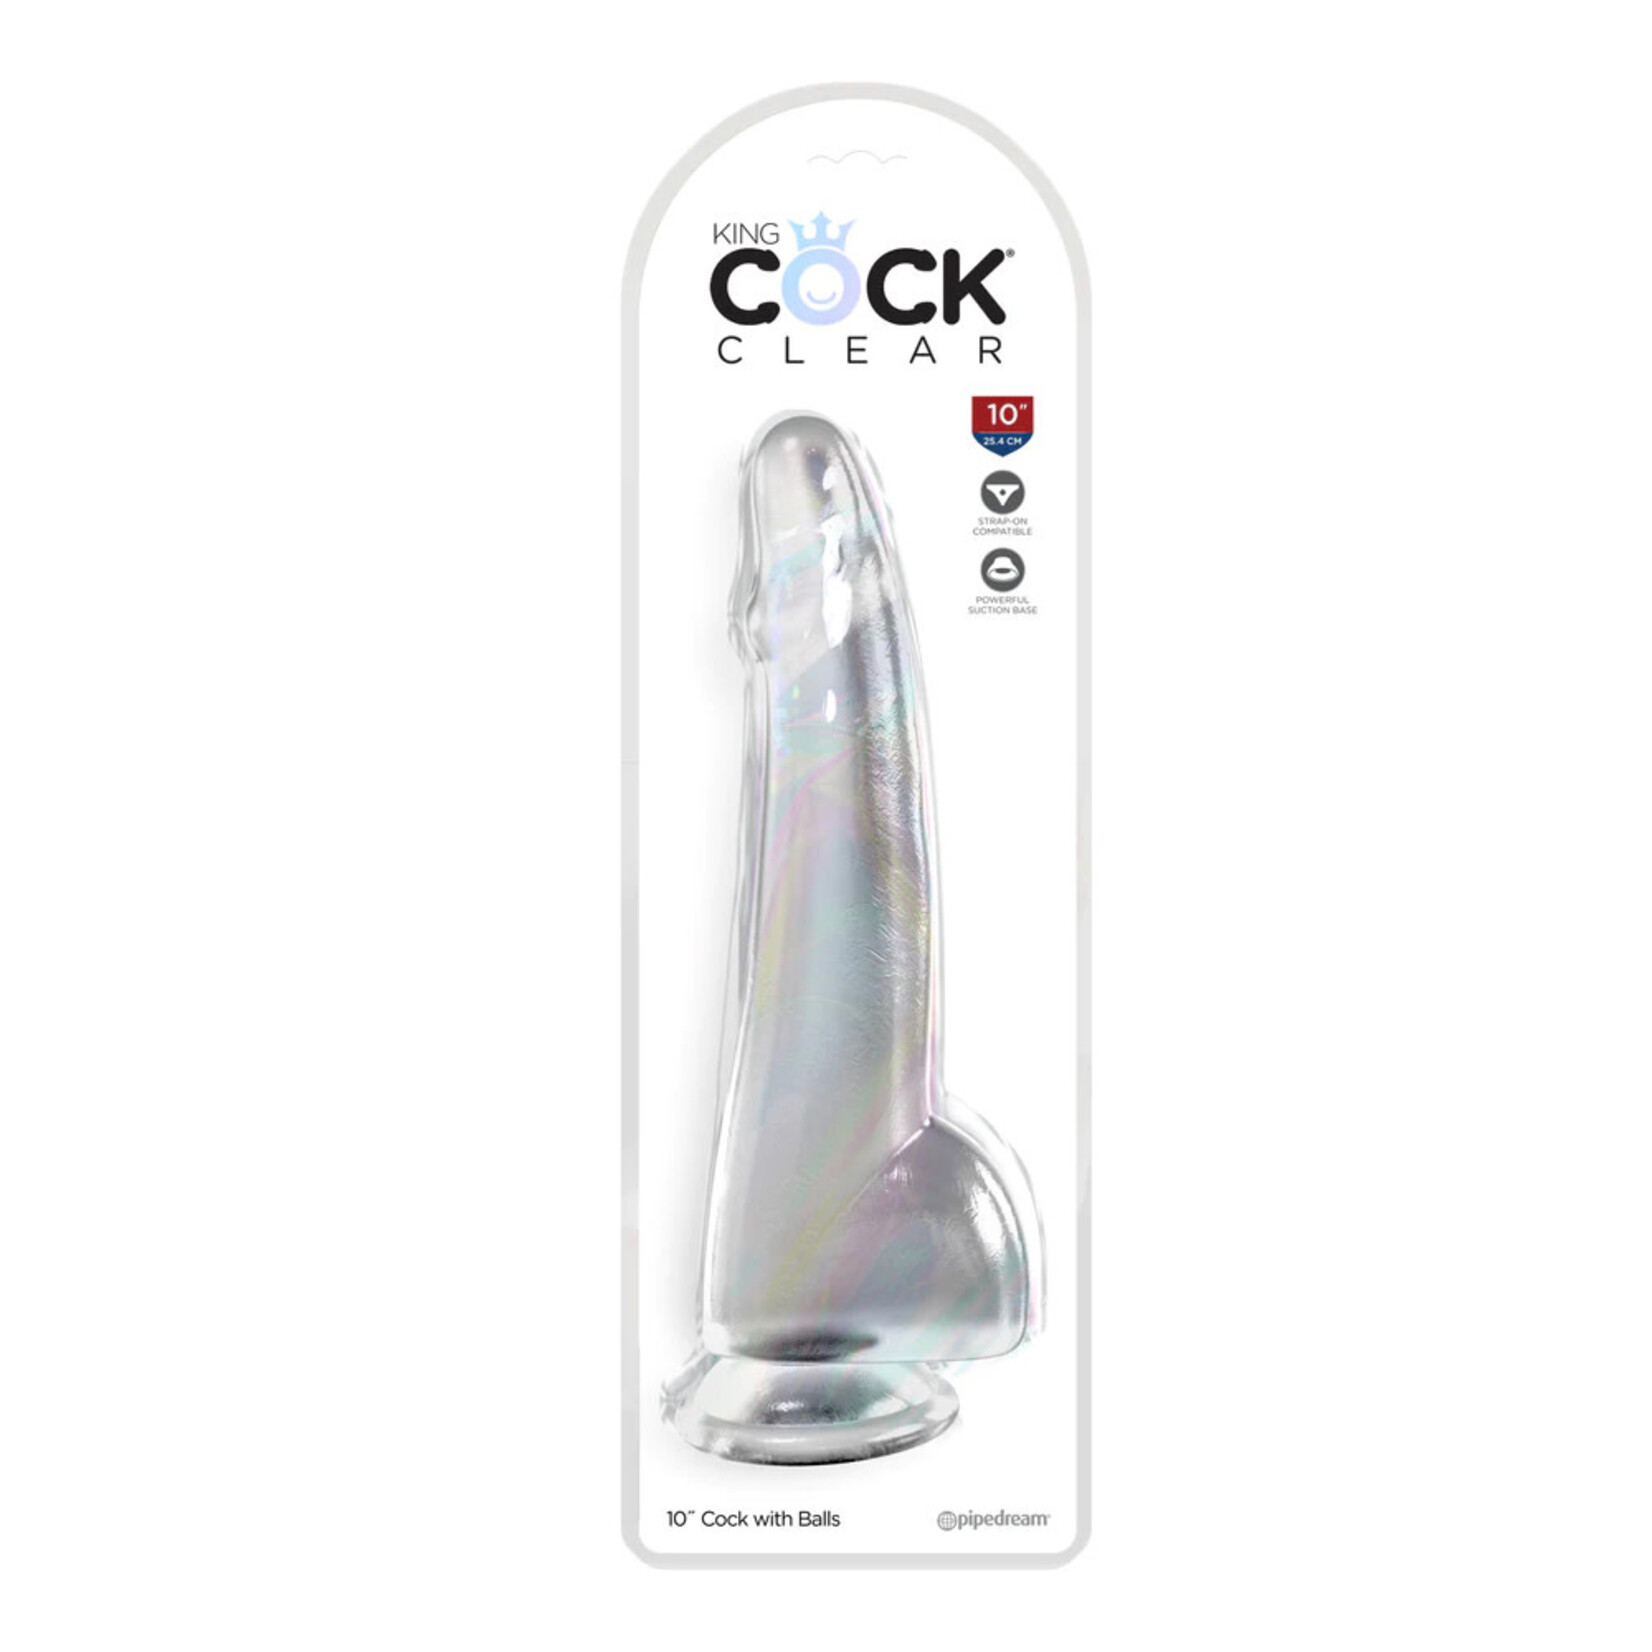 KING COCK KING COCK CLEAR 10" COCK WITH BALLS - CLEAR